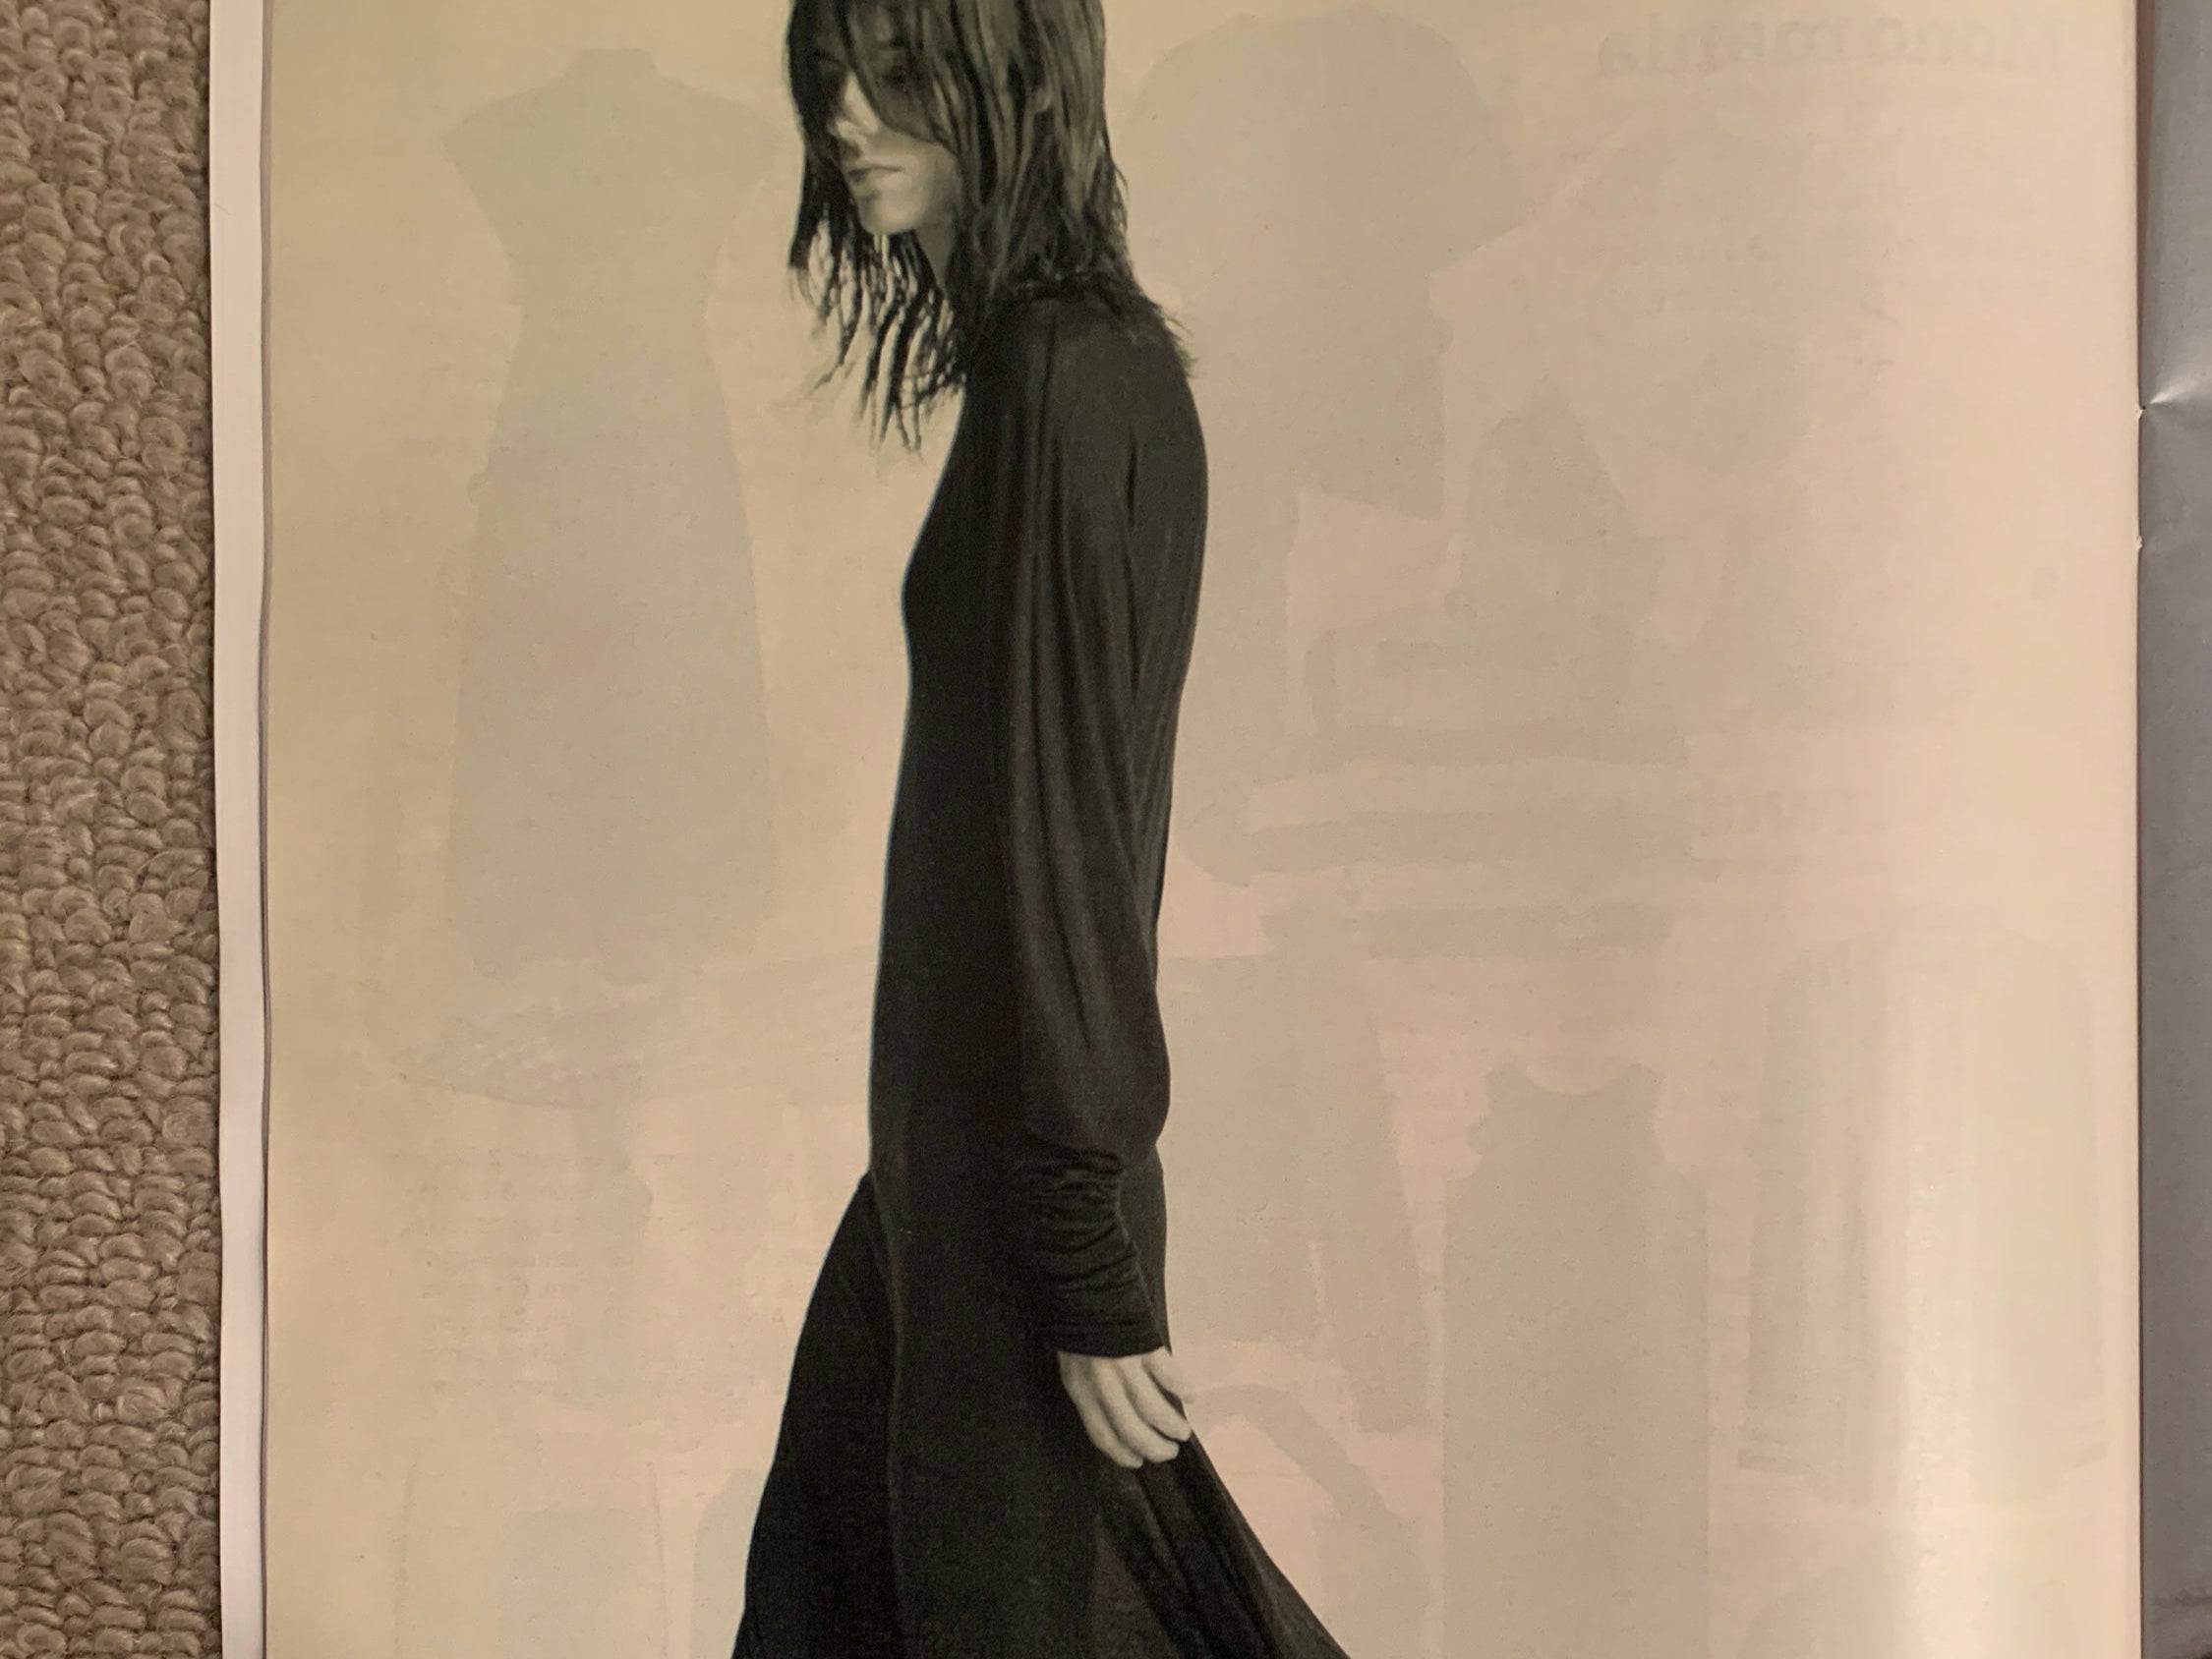 Photo issued by Advertising Standards Authority (ASA) showing an ad for Sportmax, a subsidiary label of Max Mara, seen in The Sunday Times Style magazine on 28 February, which featured a female model pictured from the side and wearing a long-sleeved ankle length black dress with boots